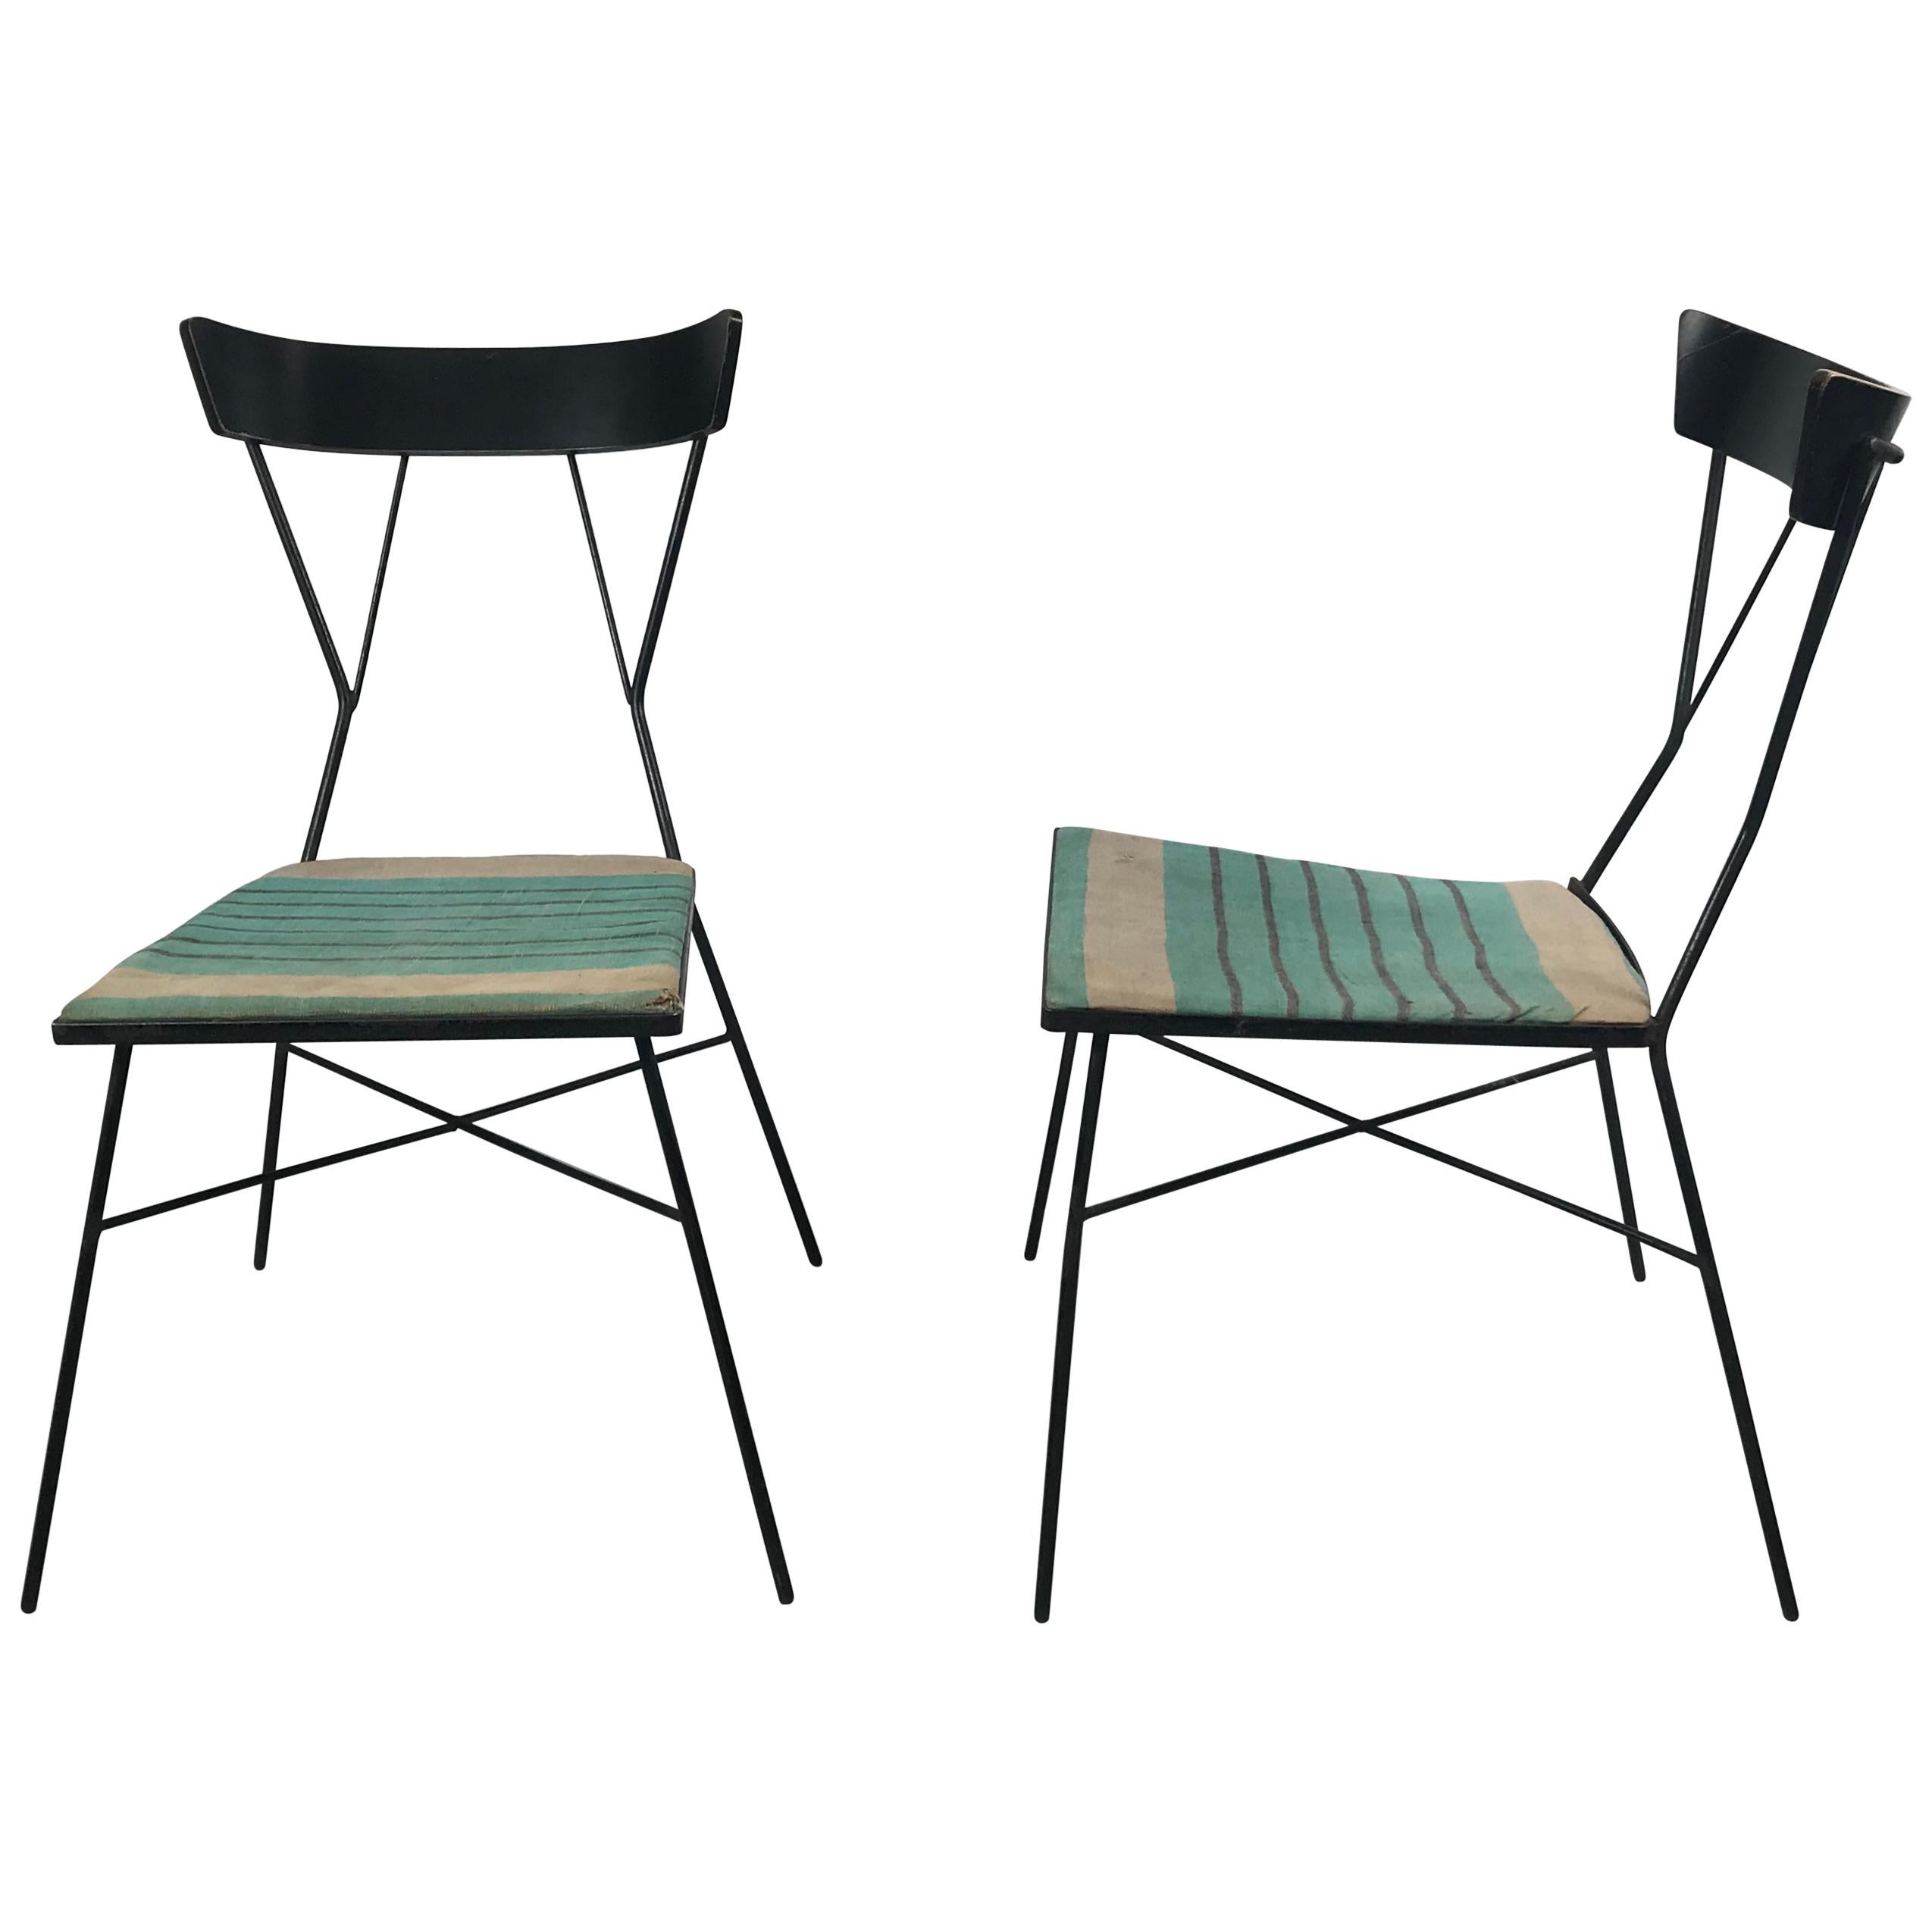 Rare Group 76 Chairs by Paul McCobb for Arbuck